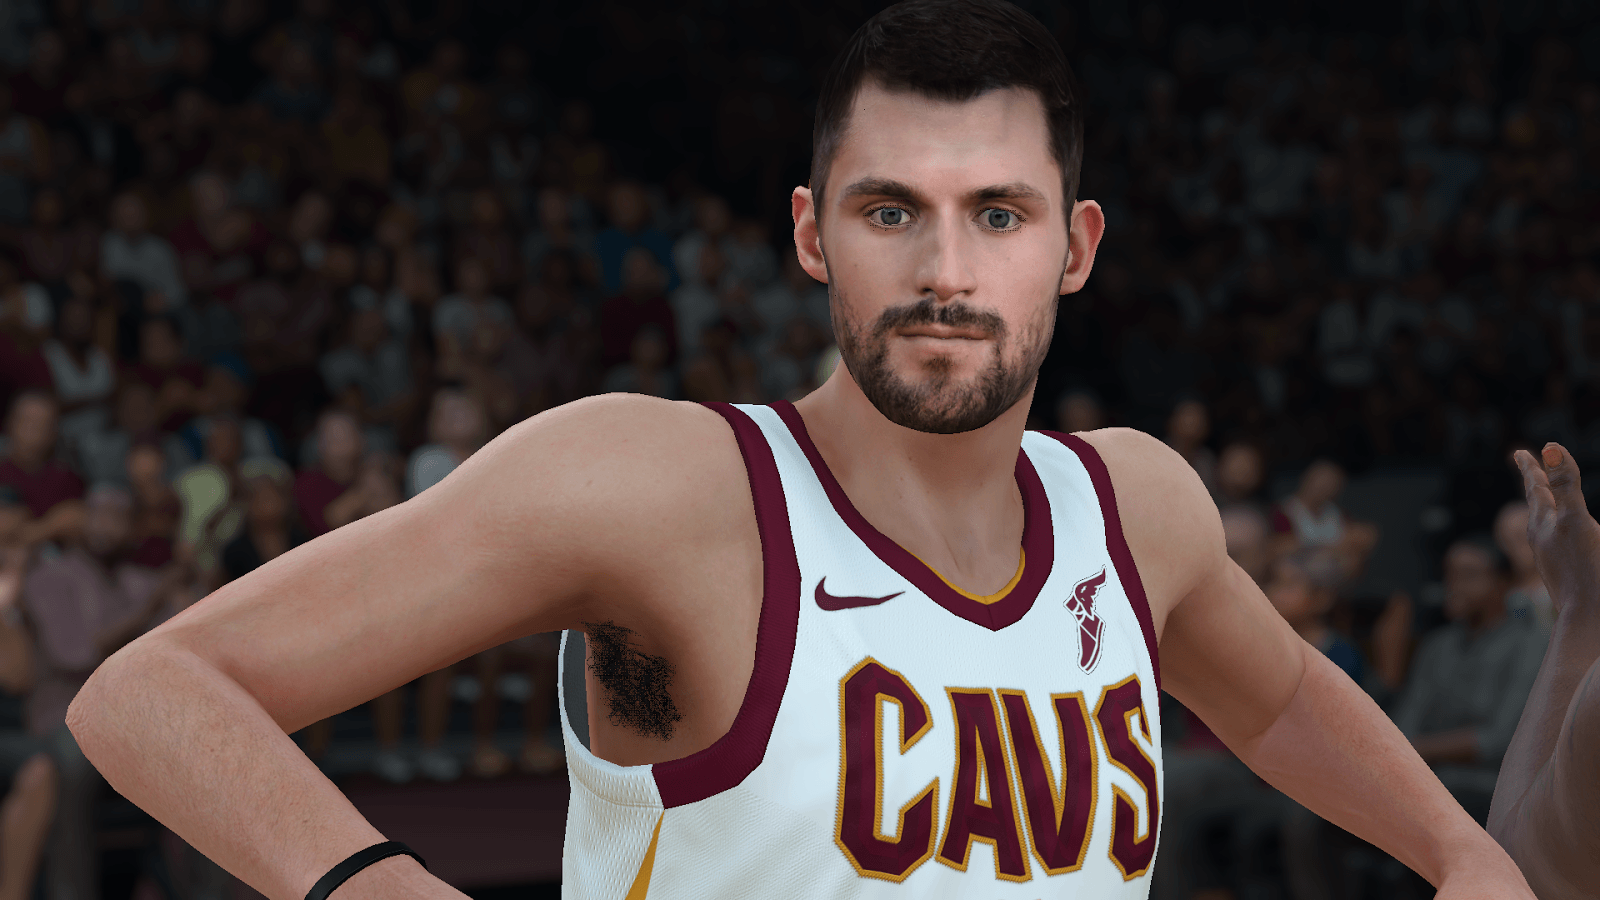 DNA Of Basketball. DNAOBB: NBA 2K18 Kevin Love Cyberface New Look